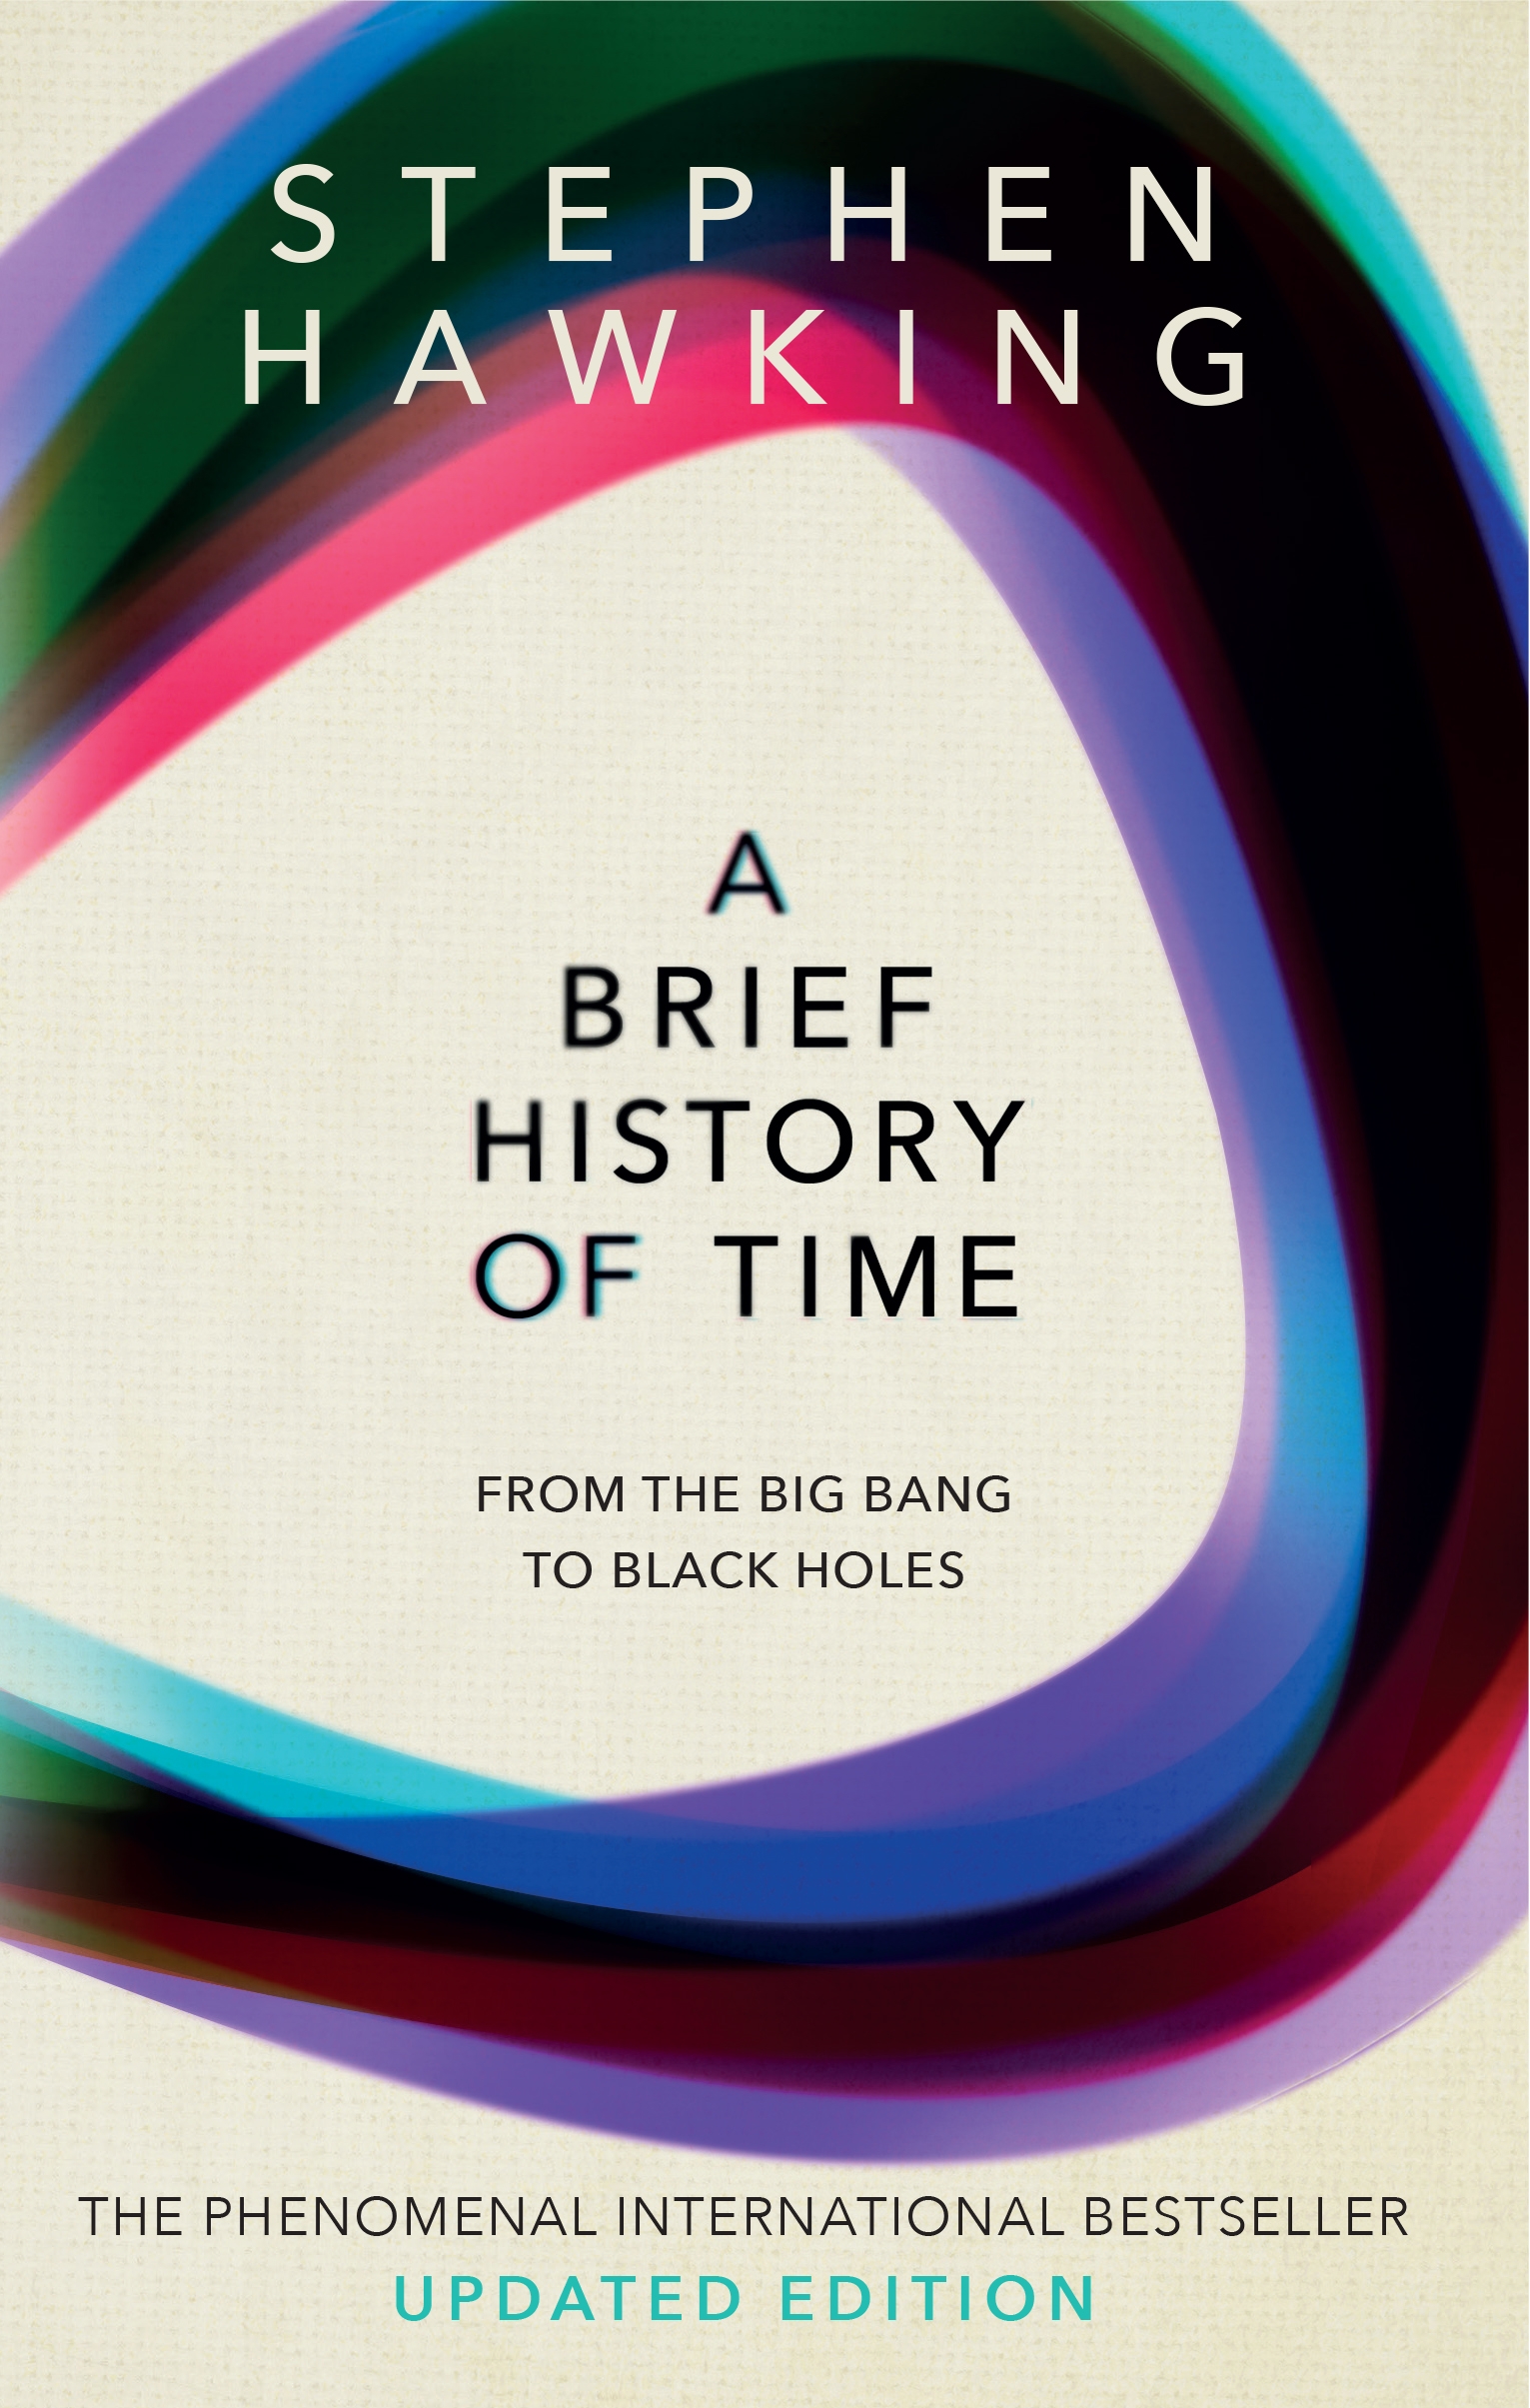 A Brief History Of Time by Stephen Hawking - Penguin Books Australia